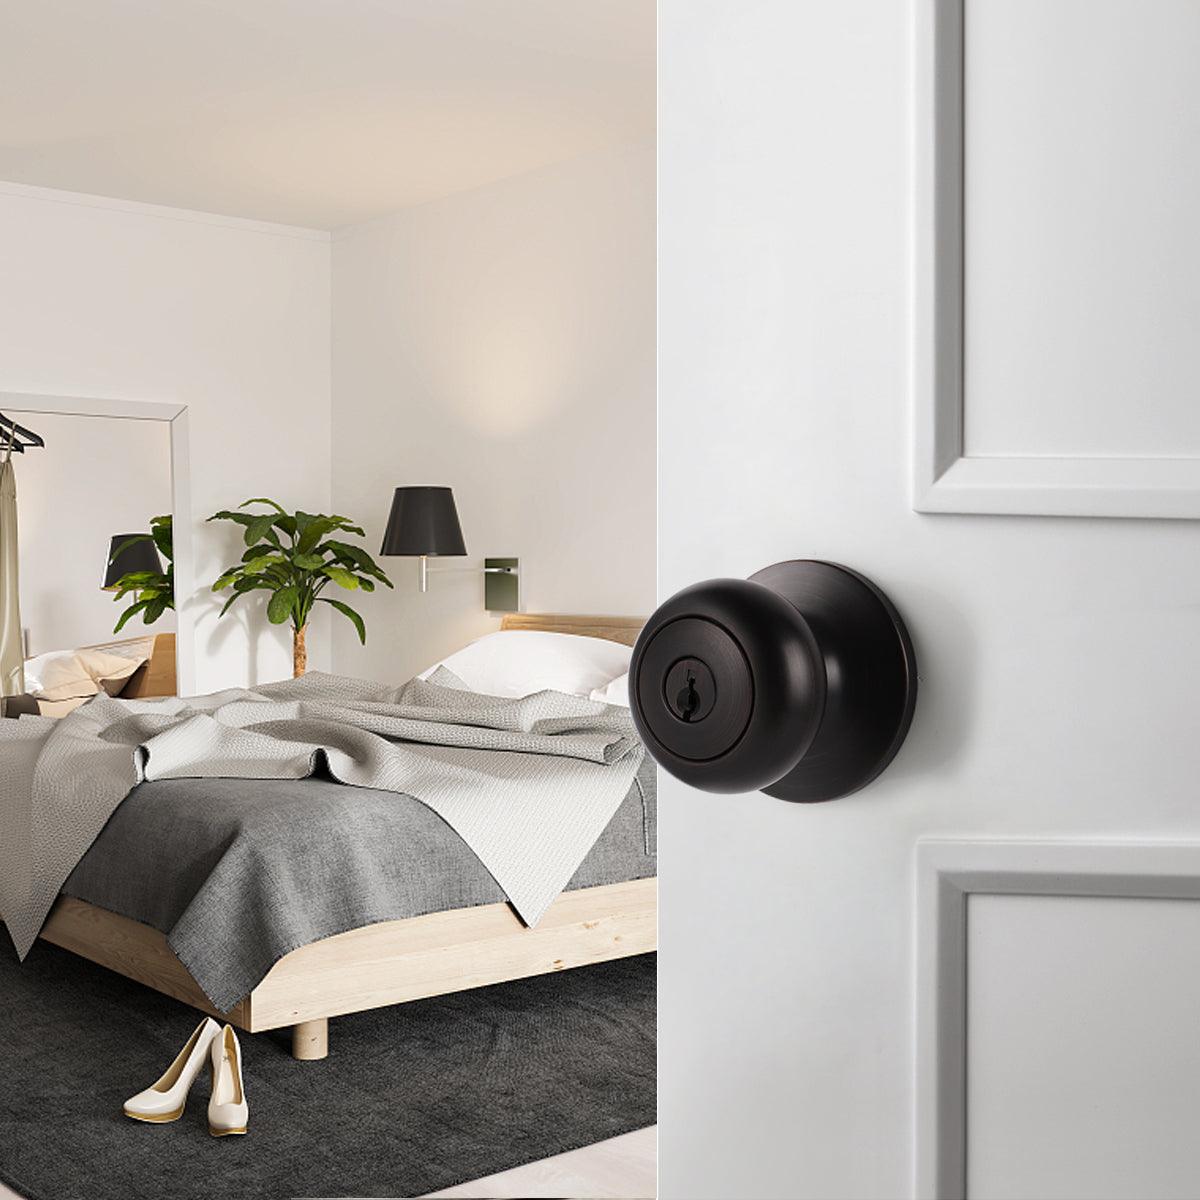 Single Connect Rod Flat Ball Knobs Entry Keyed/Privacy/Passage/Dummy Door Lock Knob Oil Rubbed Bronze Finish DL5766ORB